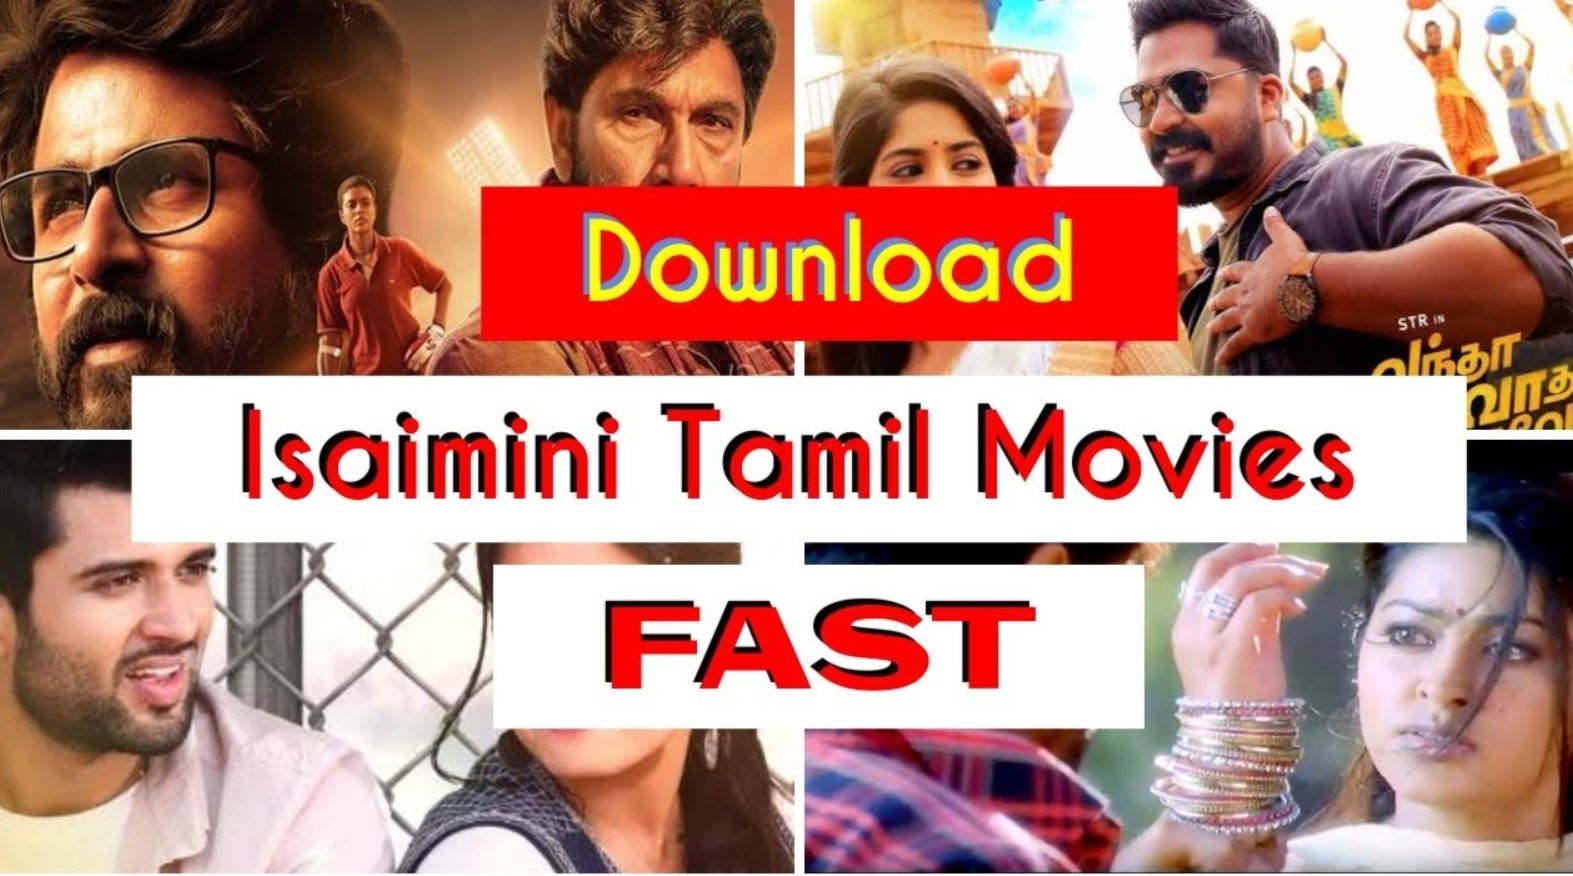 How To Download Isaimini Tamil Movies?